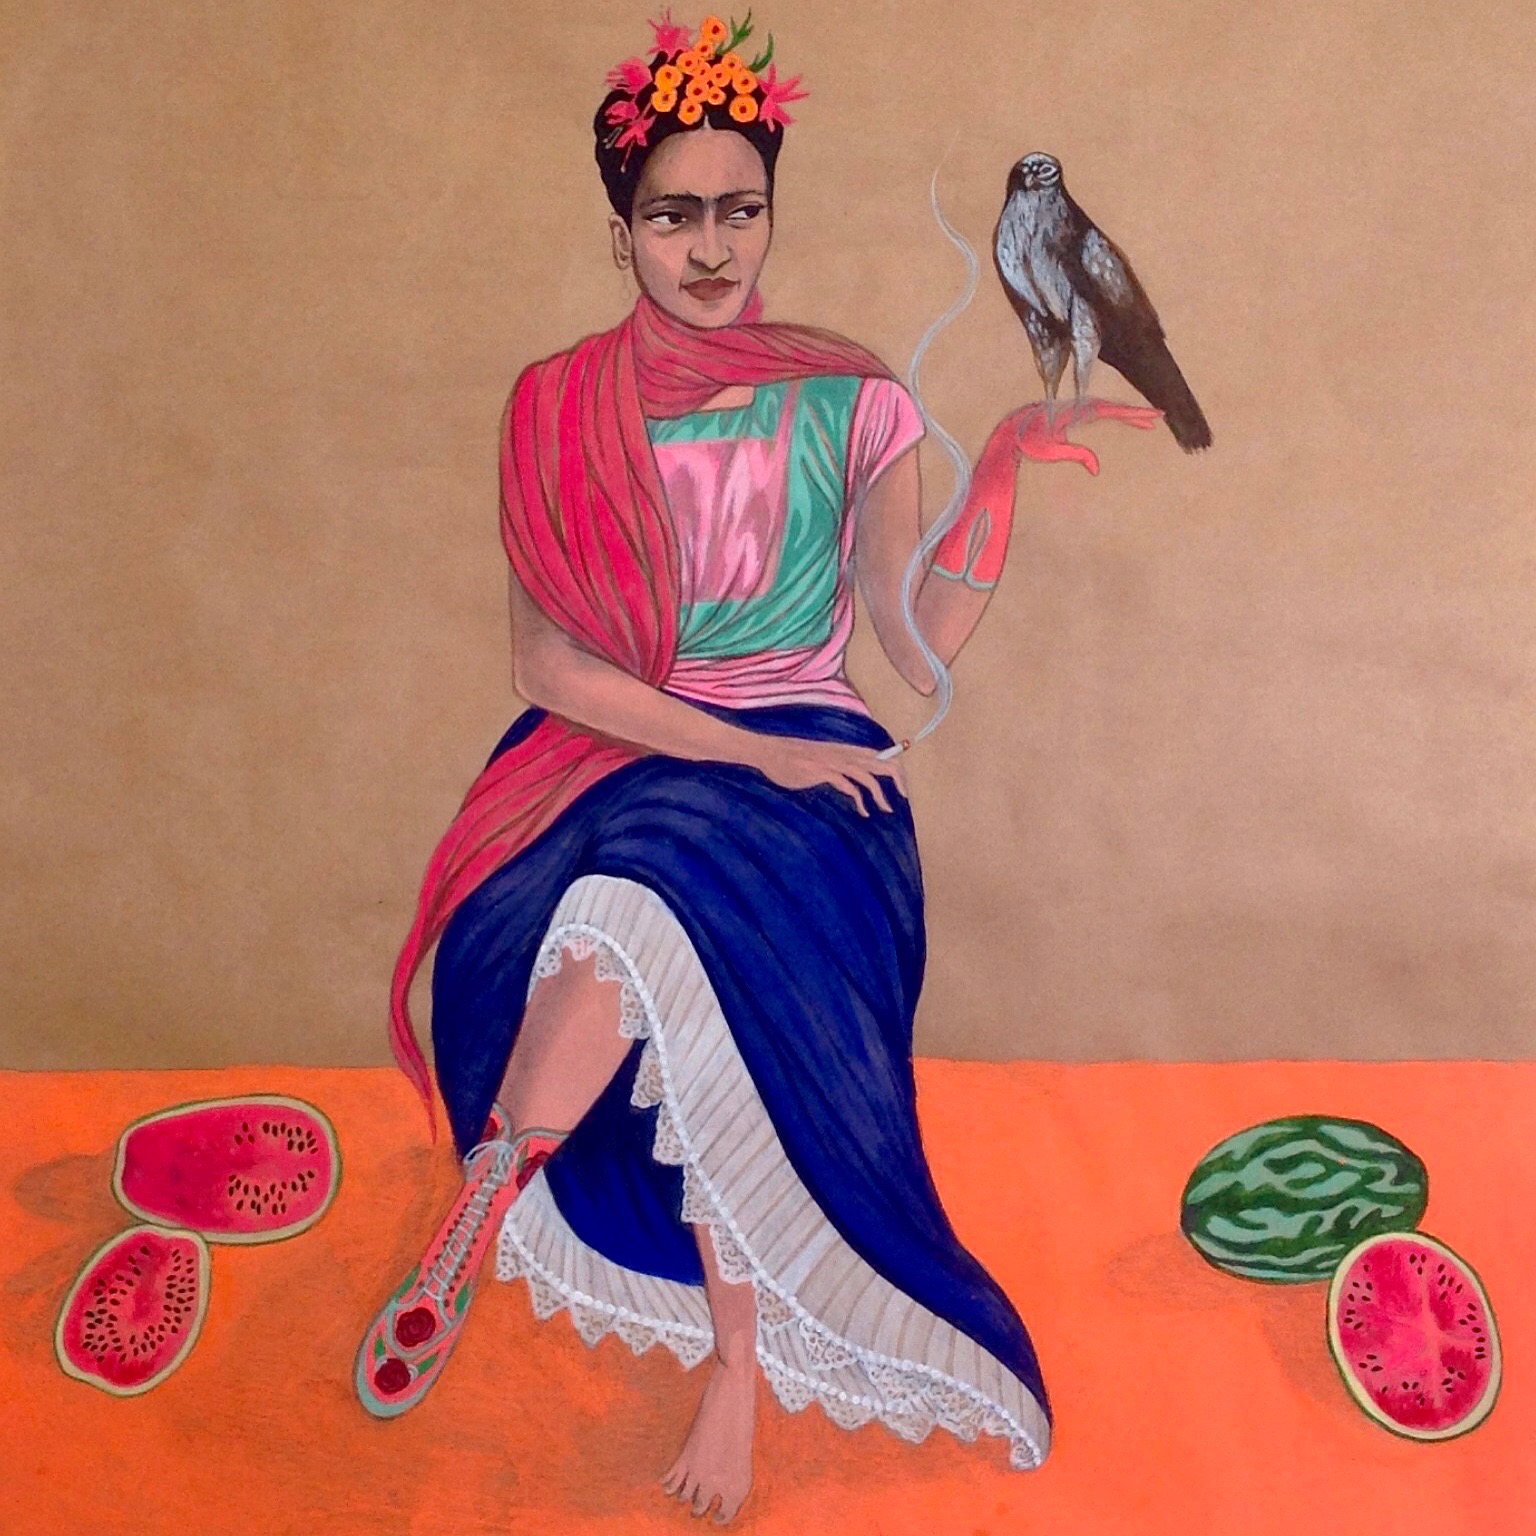 Frida Kahlo with hawk, watermelons and prosthetic leg, 2015